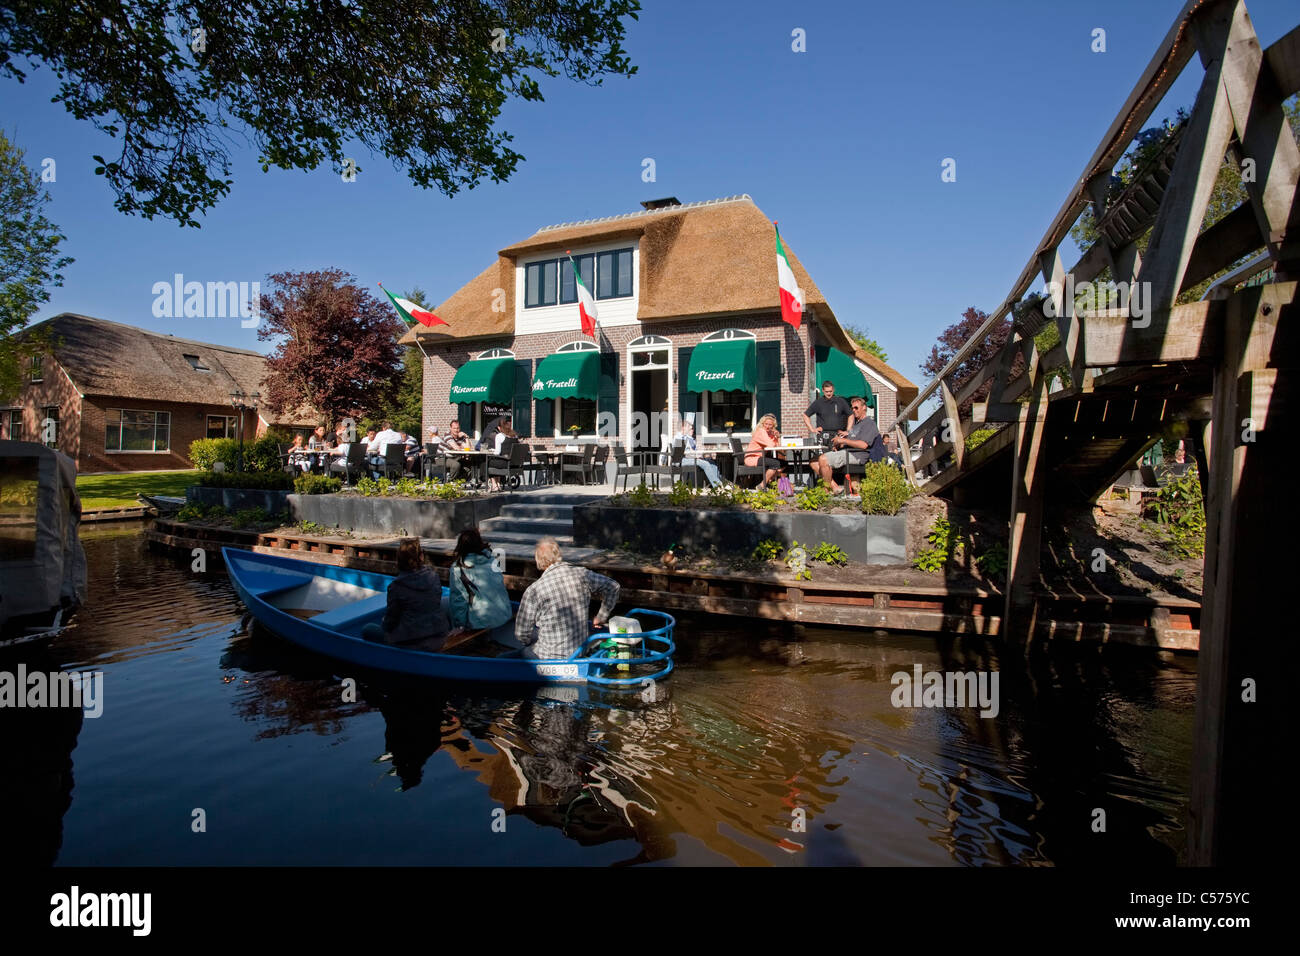 The Netherlands, Giethoorn, Village with almost only waterways. Italian restaurant and outdoor cafe. Boat pasing. Stock Photo